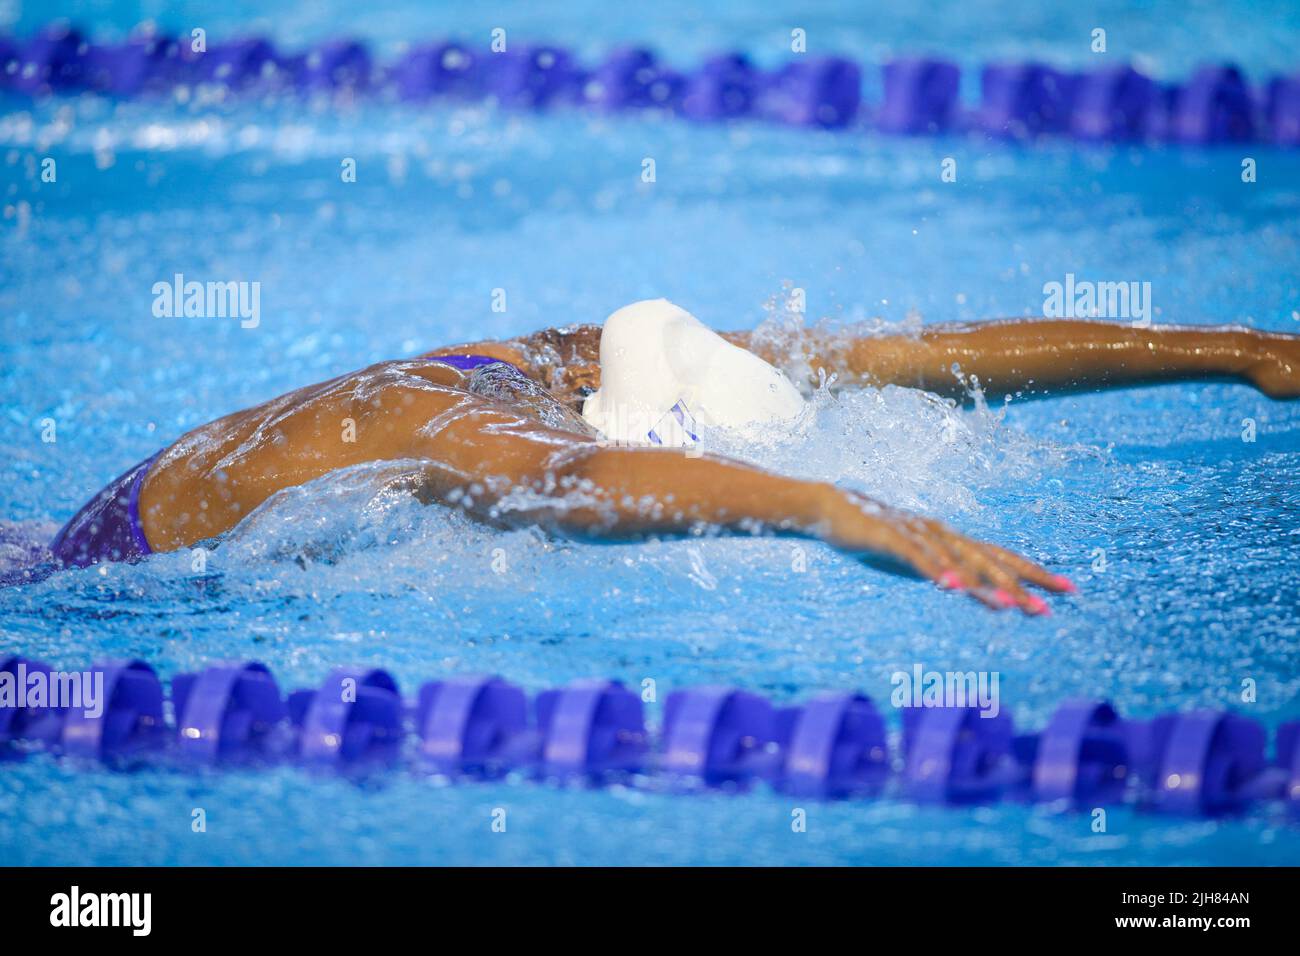 Otopeni, Romania - 8 July 2022: Details with a professional Israeli  female athlete swimming in an olympic swimming pool butterfly style. Stock Photo